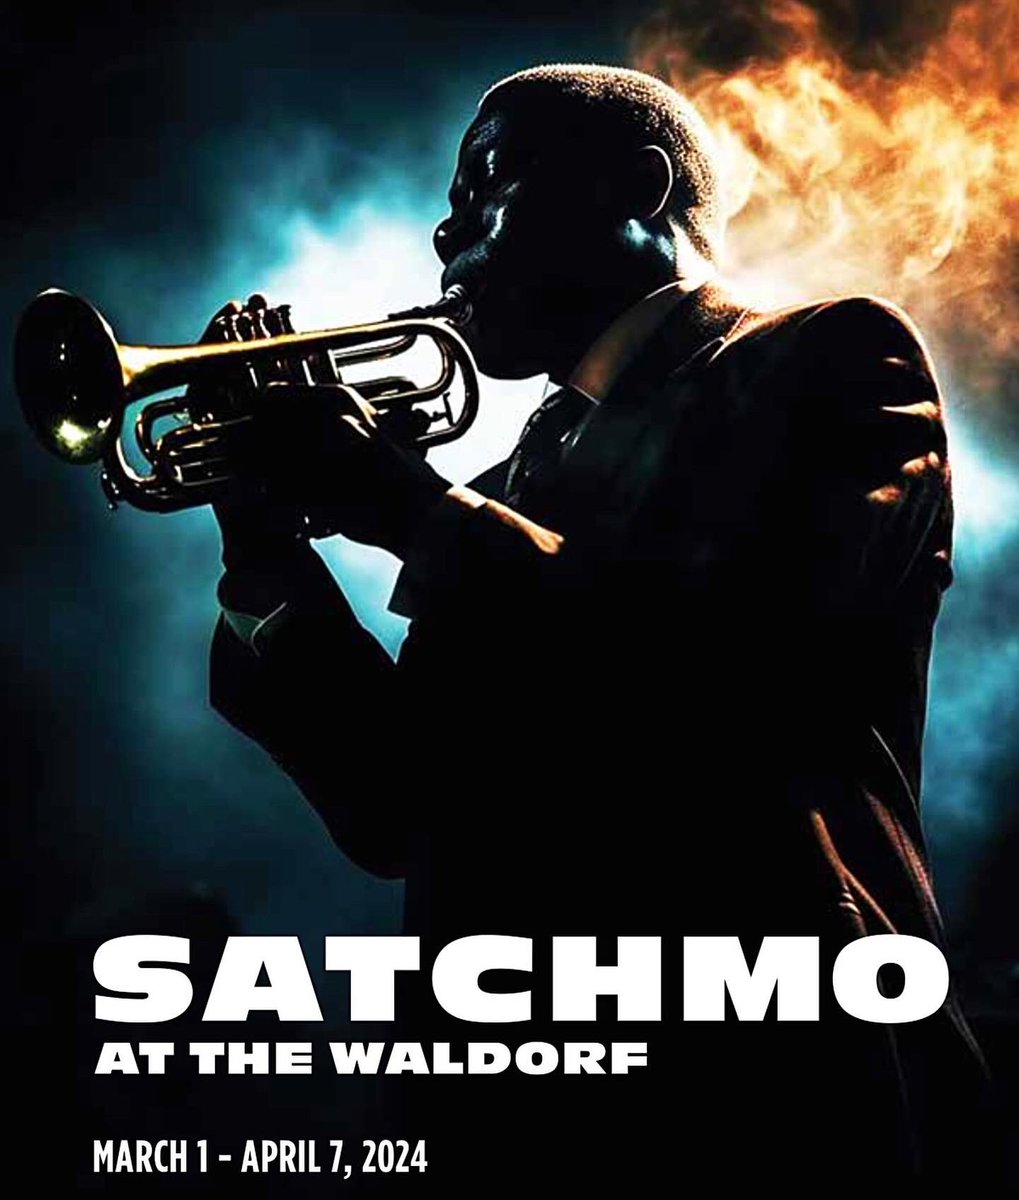 Single tickets available now! SATCHMO AT THE WALDORF will grace the stage of the historic November theatre March 1 - April 7. Don’t miss this powerful one-man, 3-character show! Get your tickets at virginiarep.org (804) 282-2620 #vareptheatre #varepsatchmo #rvatheatre